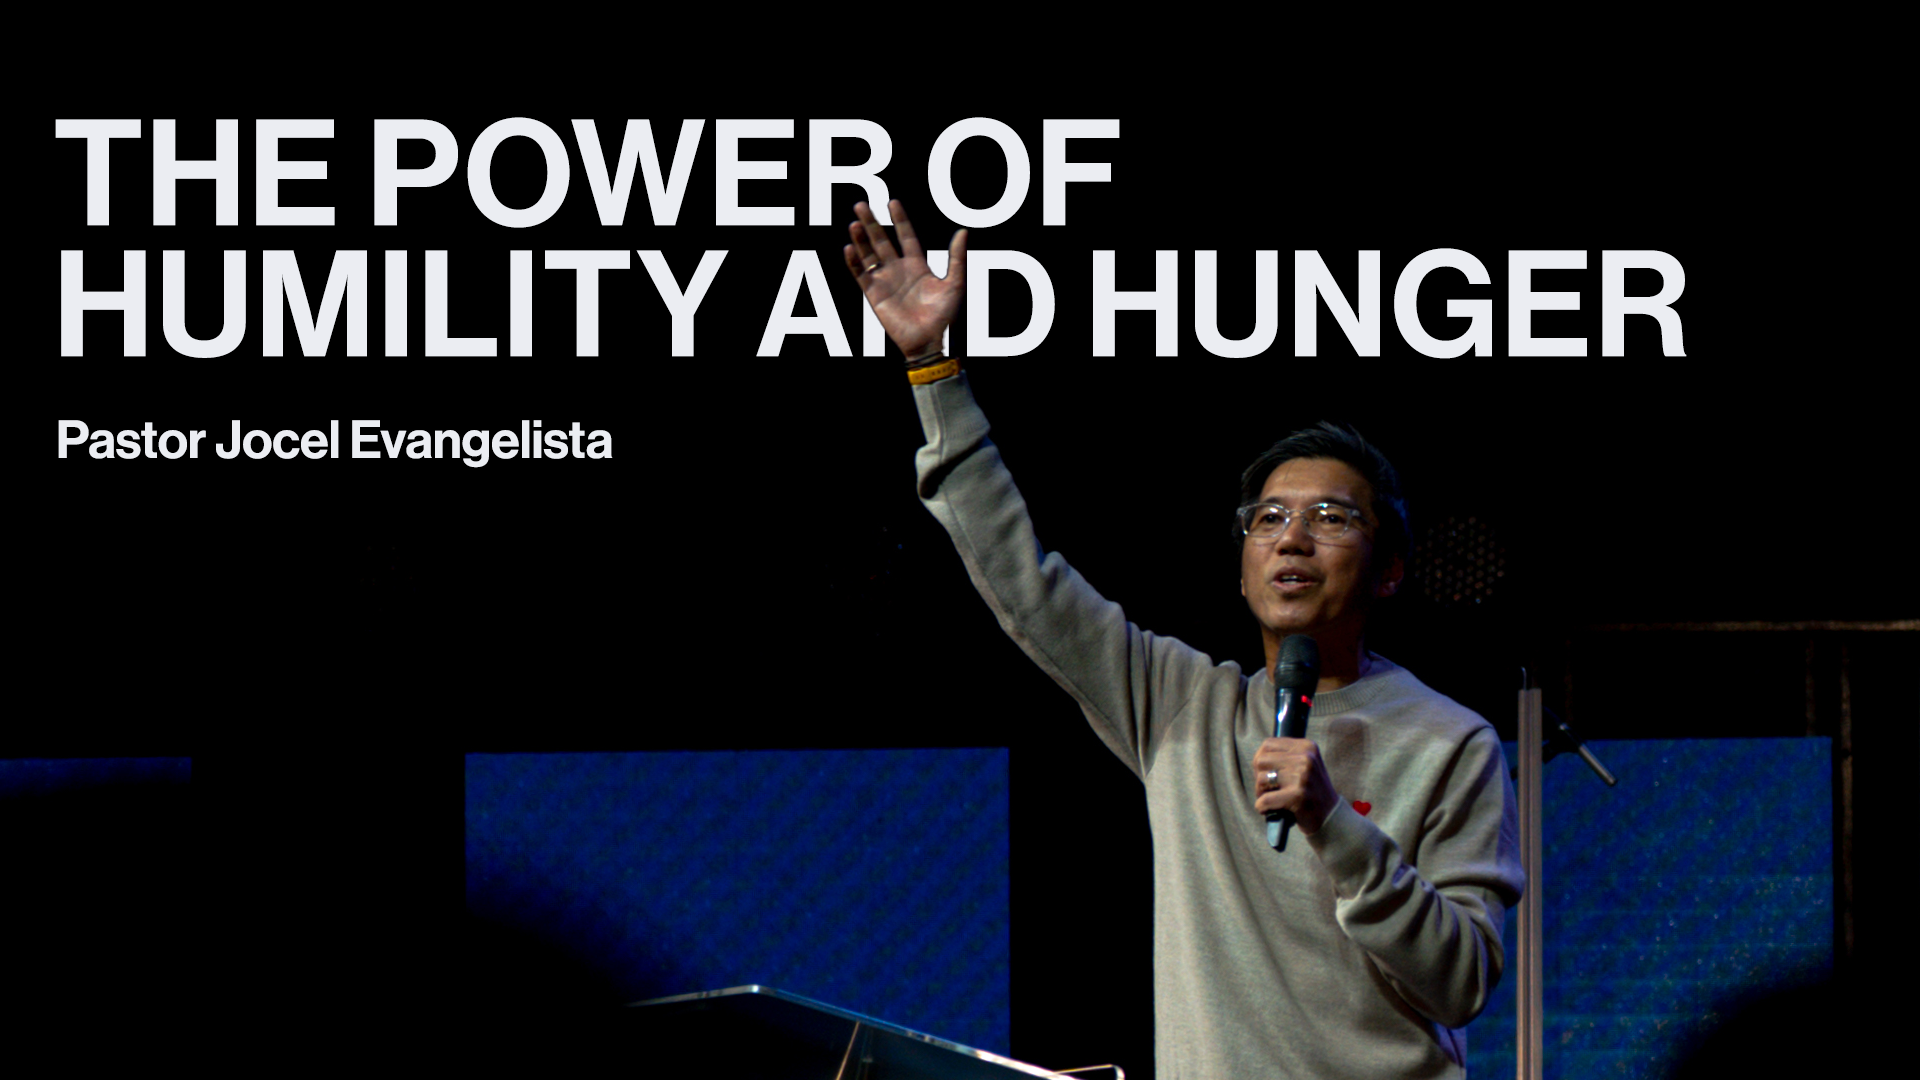 The Power of Humility & Hunger